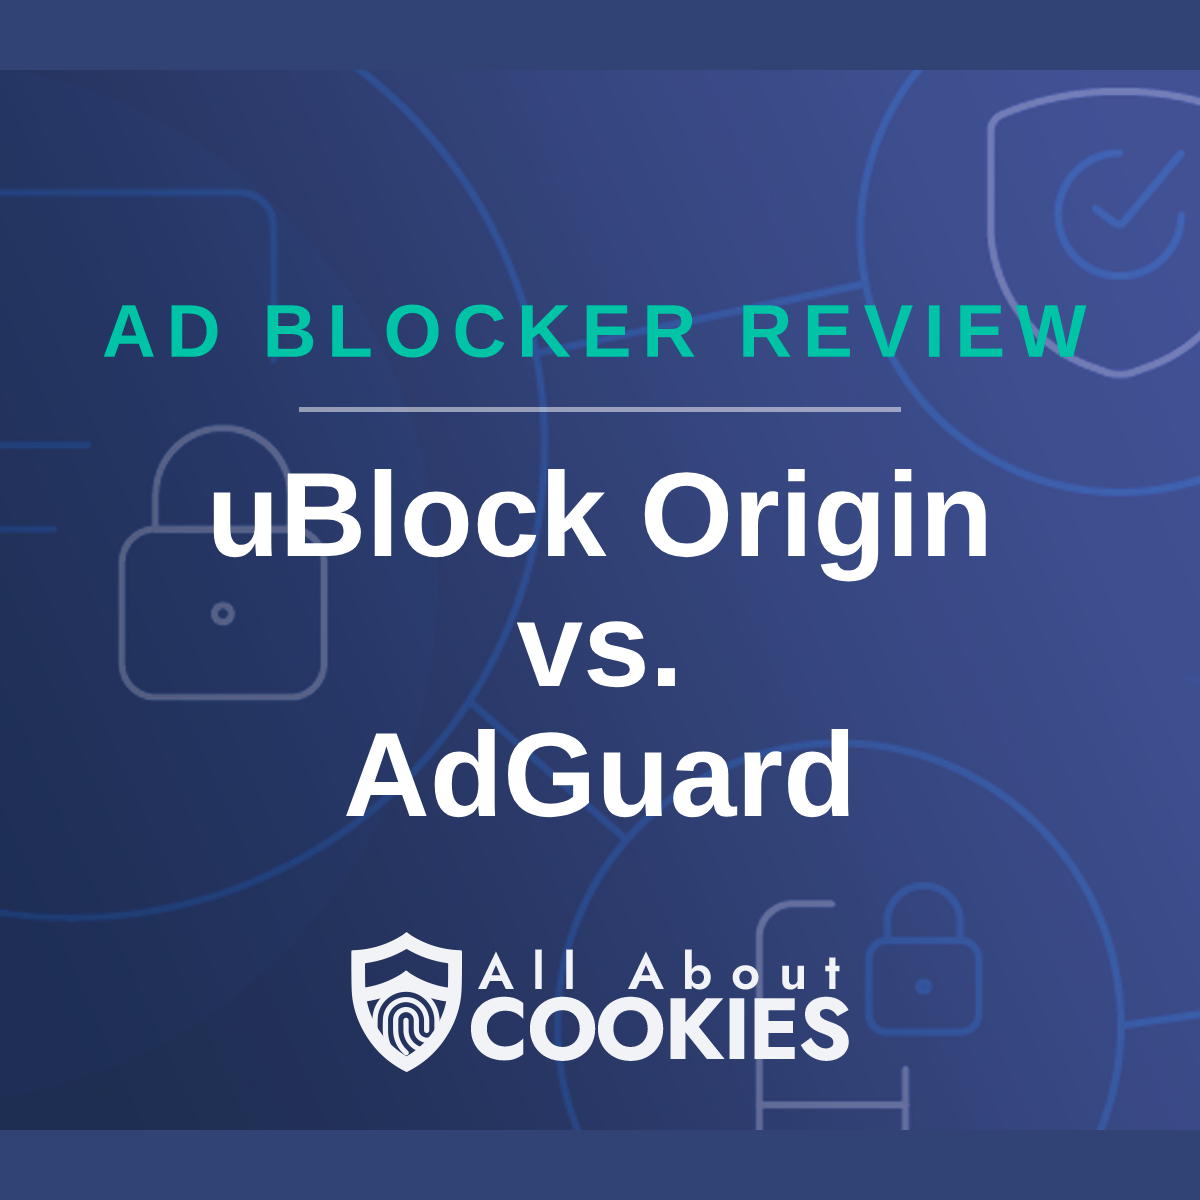 A blue background with images of locks and shields with the text “uBlock Origin vs. AdGuard” and the All About Cookies logo.